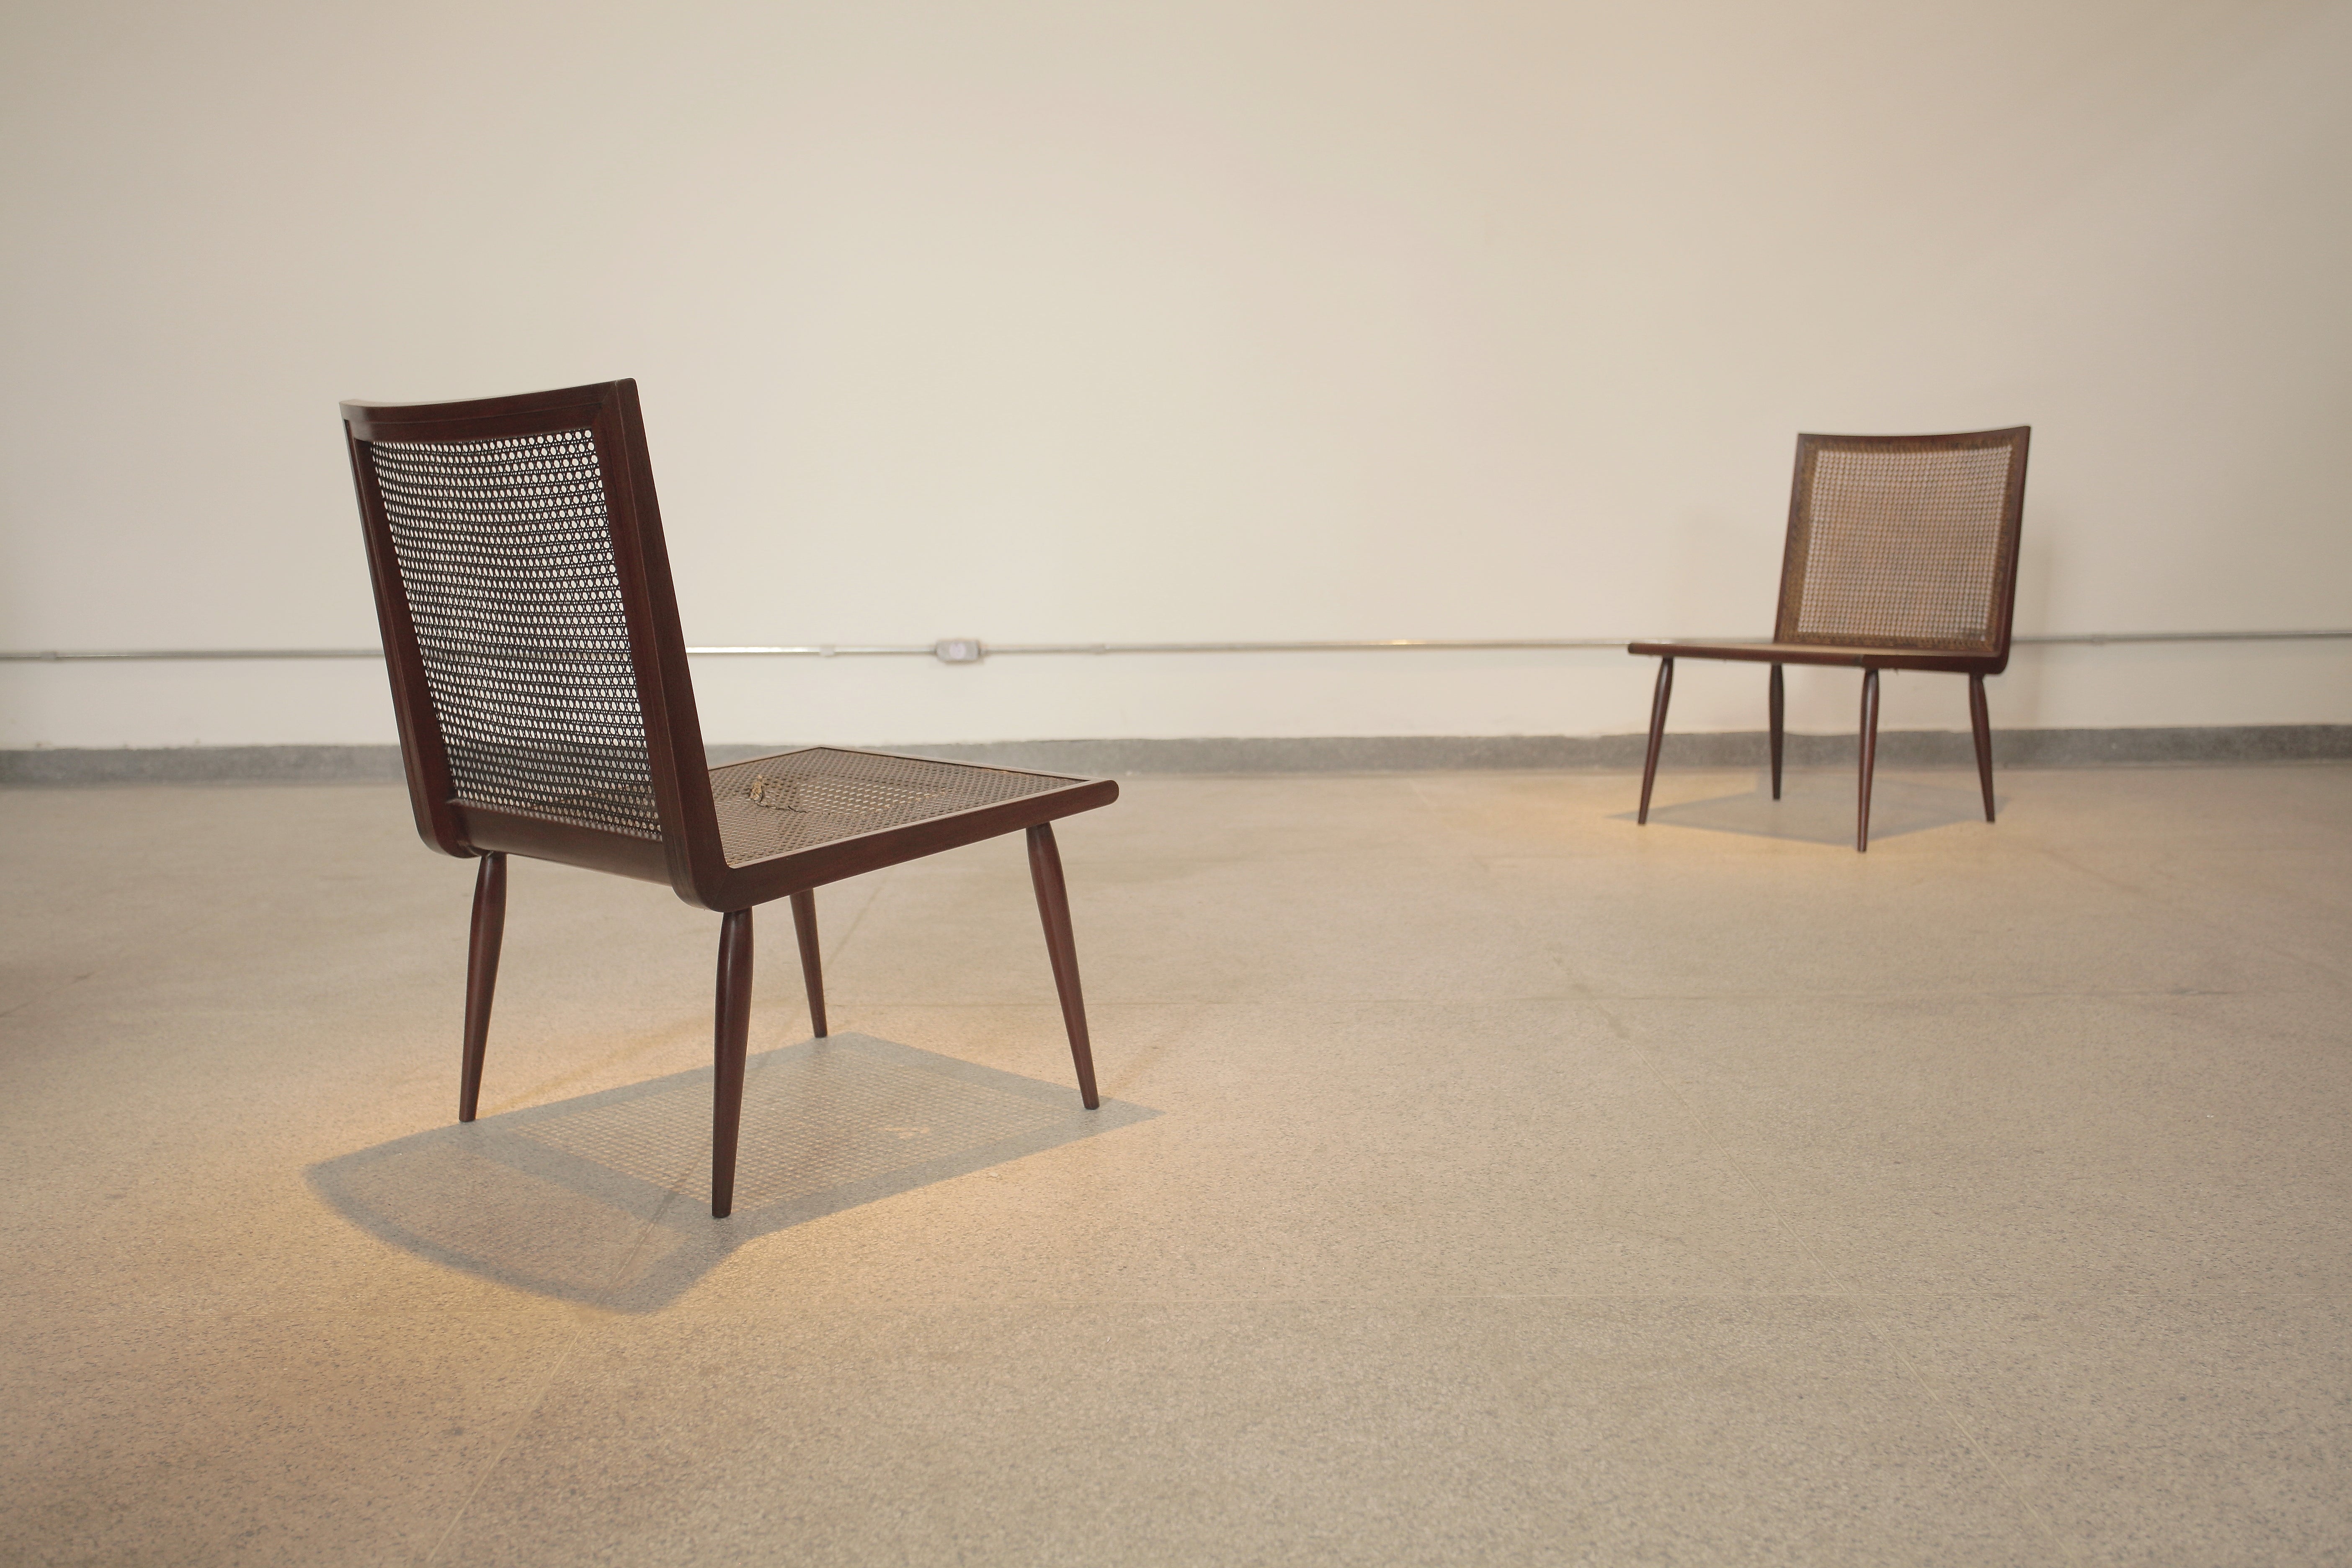 Known for his care and incomparable skill in woodworking, Joaquim Tenreiro presents in each piece of his authorship a remarkable balance and lightness. It is no different with the low chair: a piece of sophisticated simplicity perfect for collectors